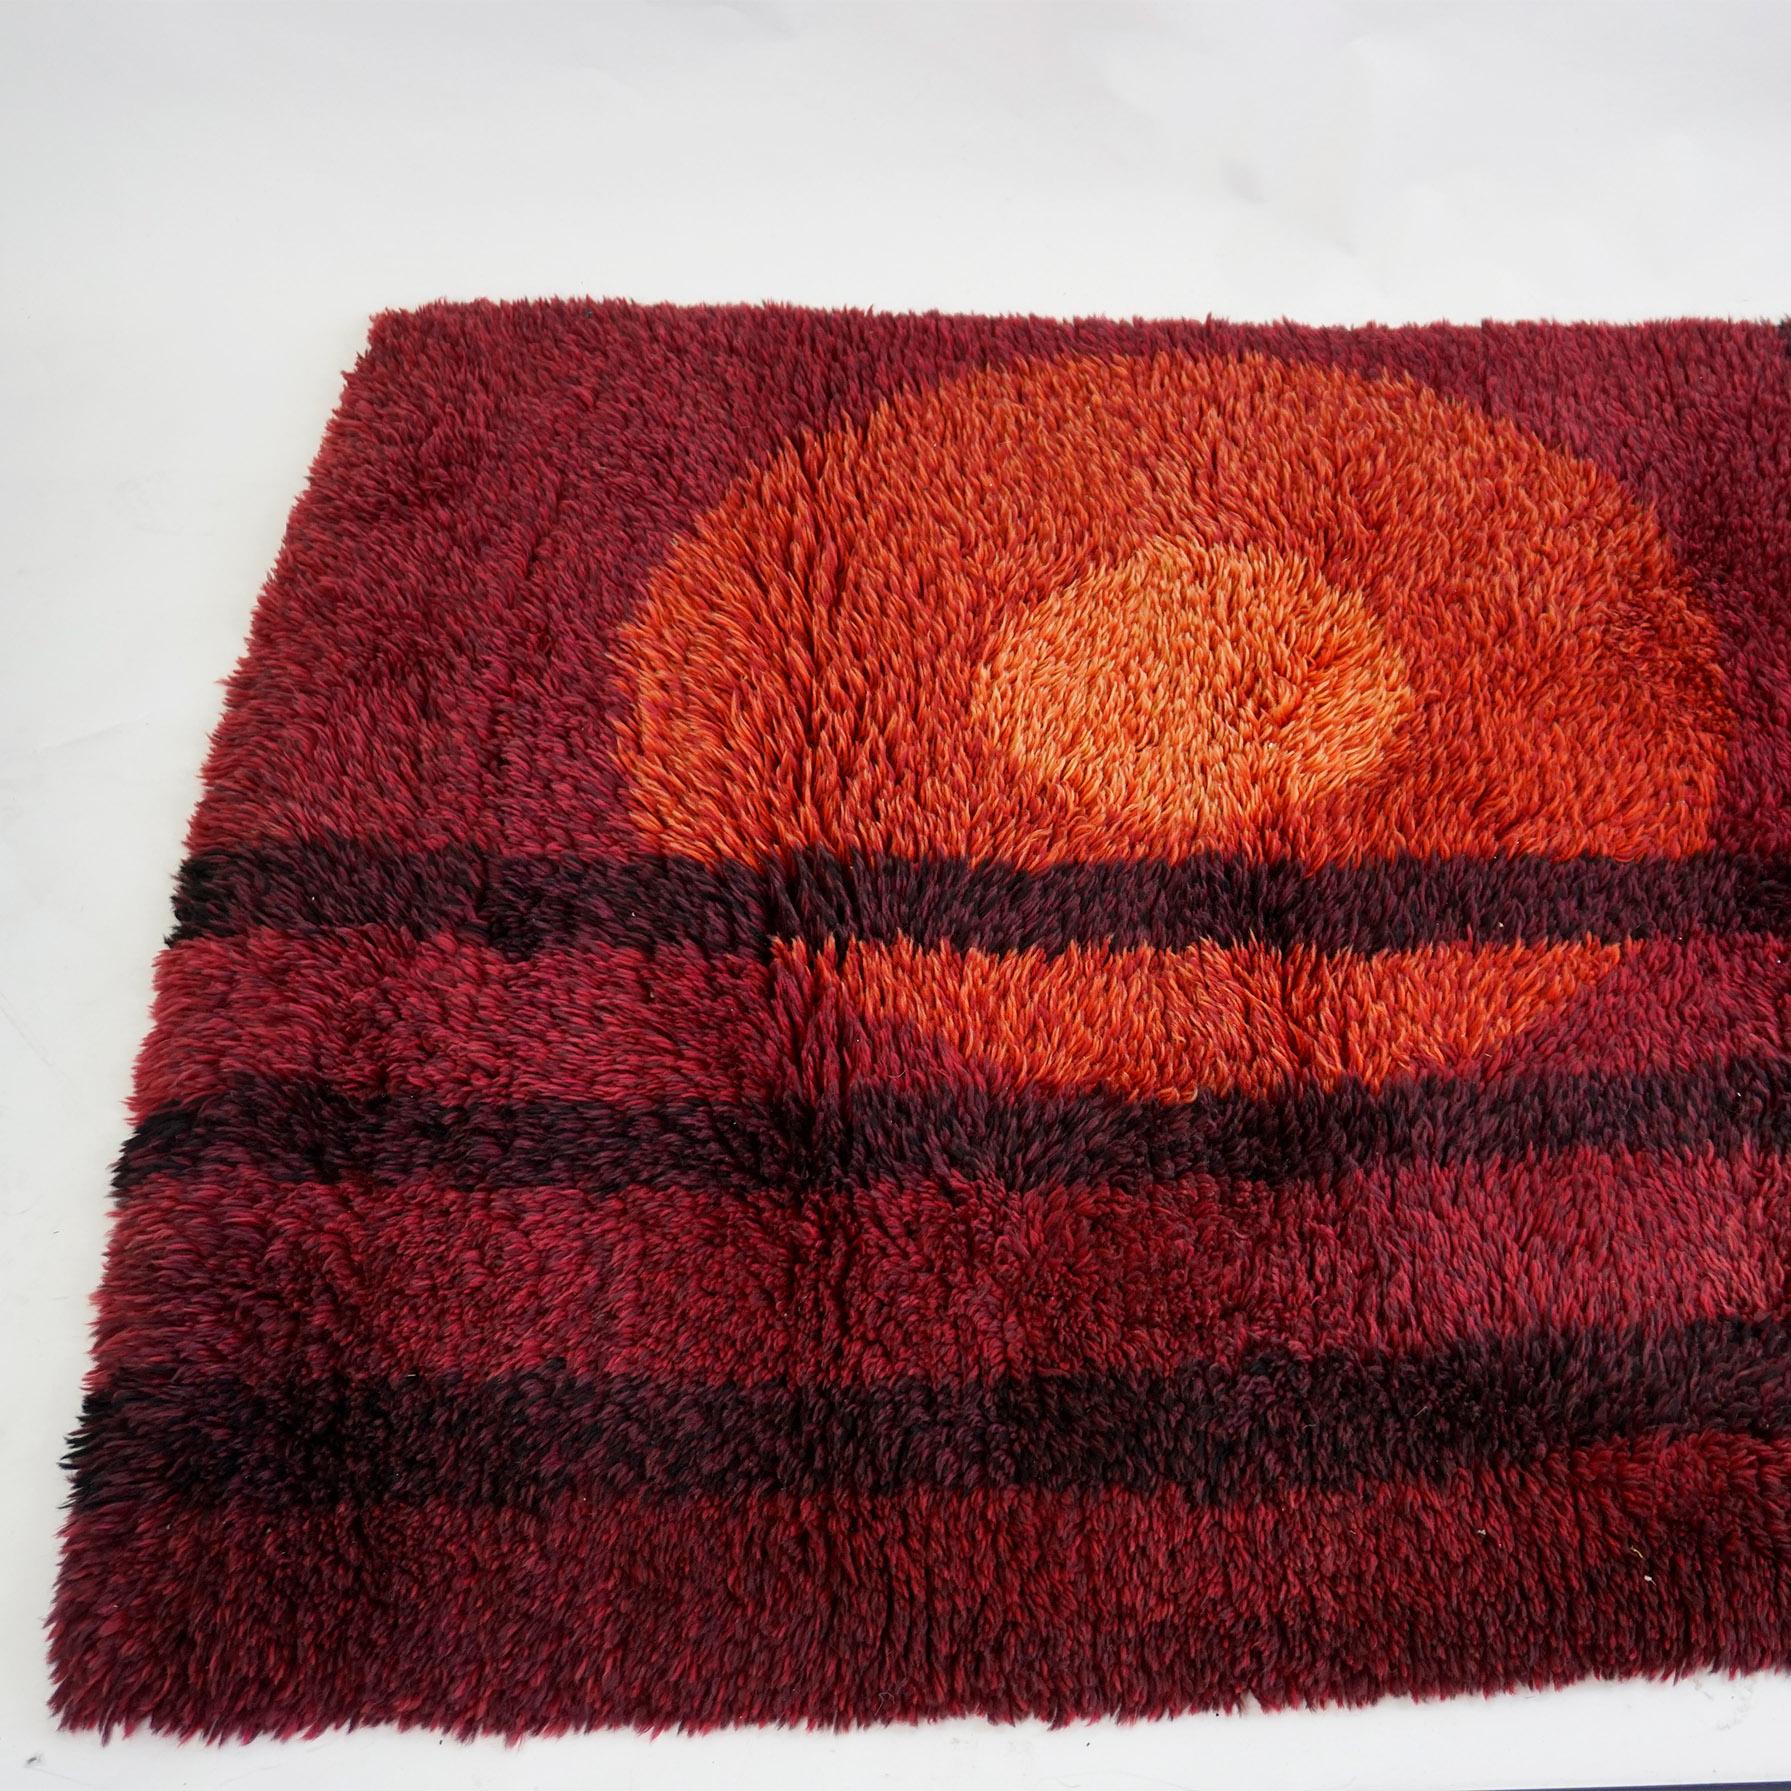 Charming and very decorative graphic design carpet in wonderful shades of red and orange colors- great highlight for any Mid-Century Modern Interior! Style very close tu Rugs manufactured by Hojer Eksport Wilton, so this one can also be attributed.